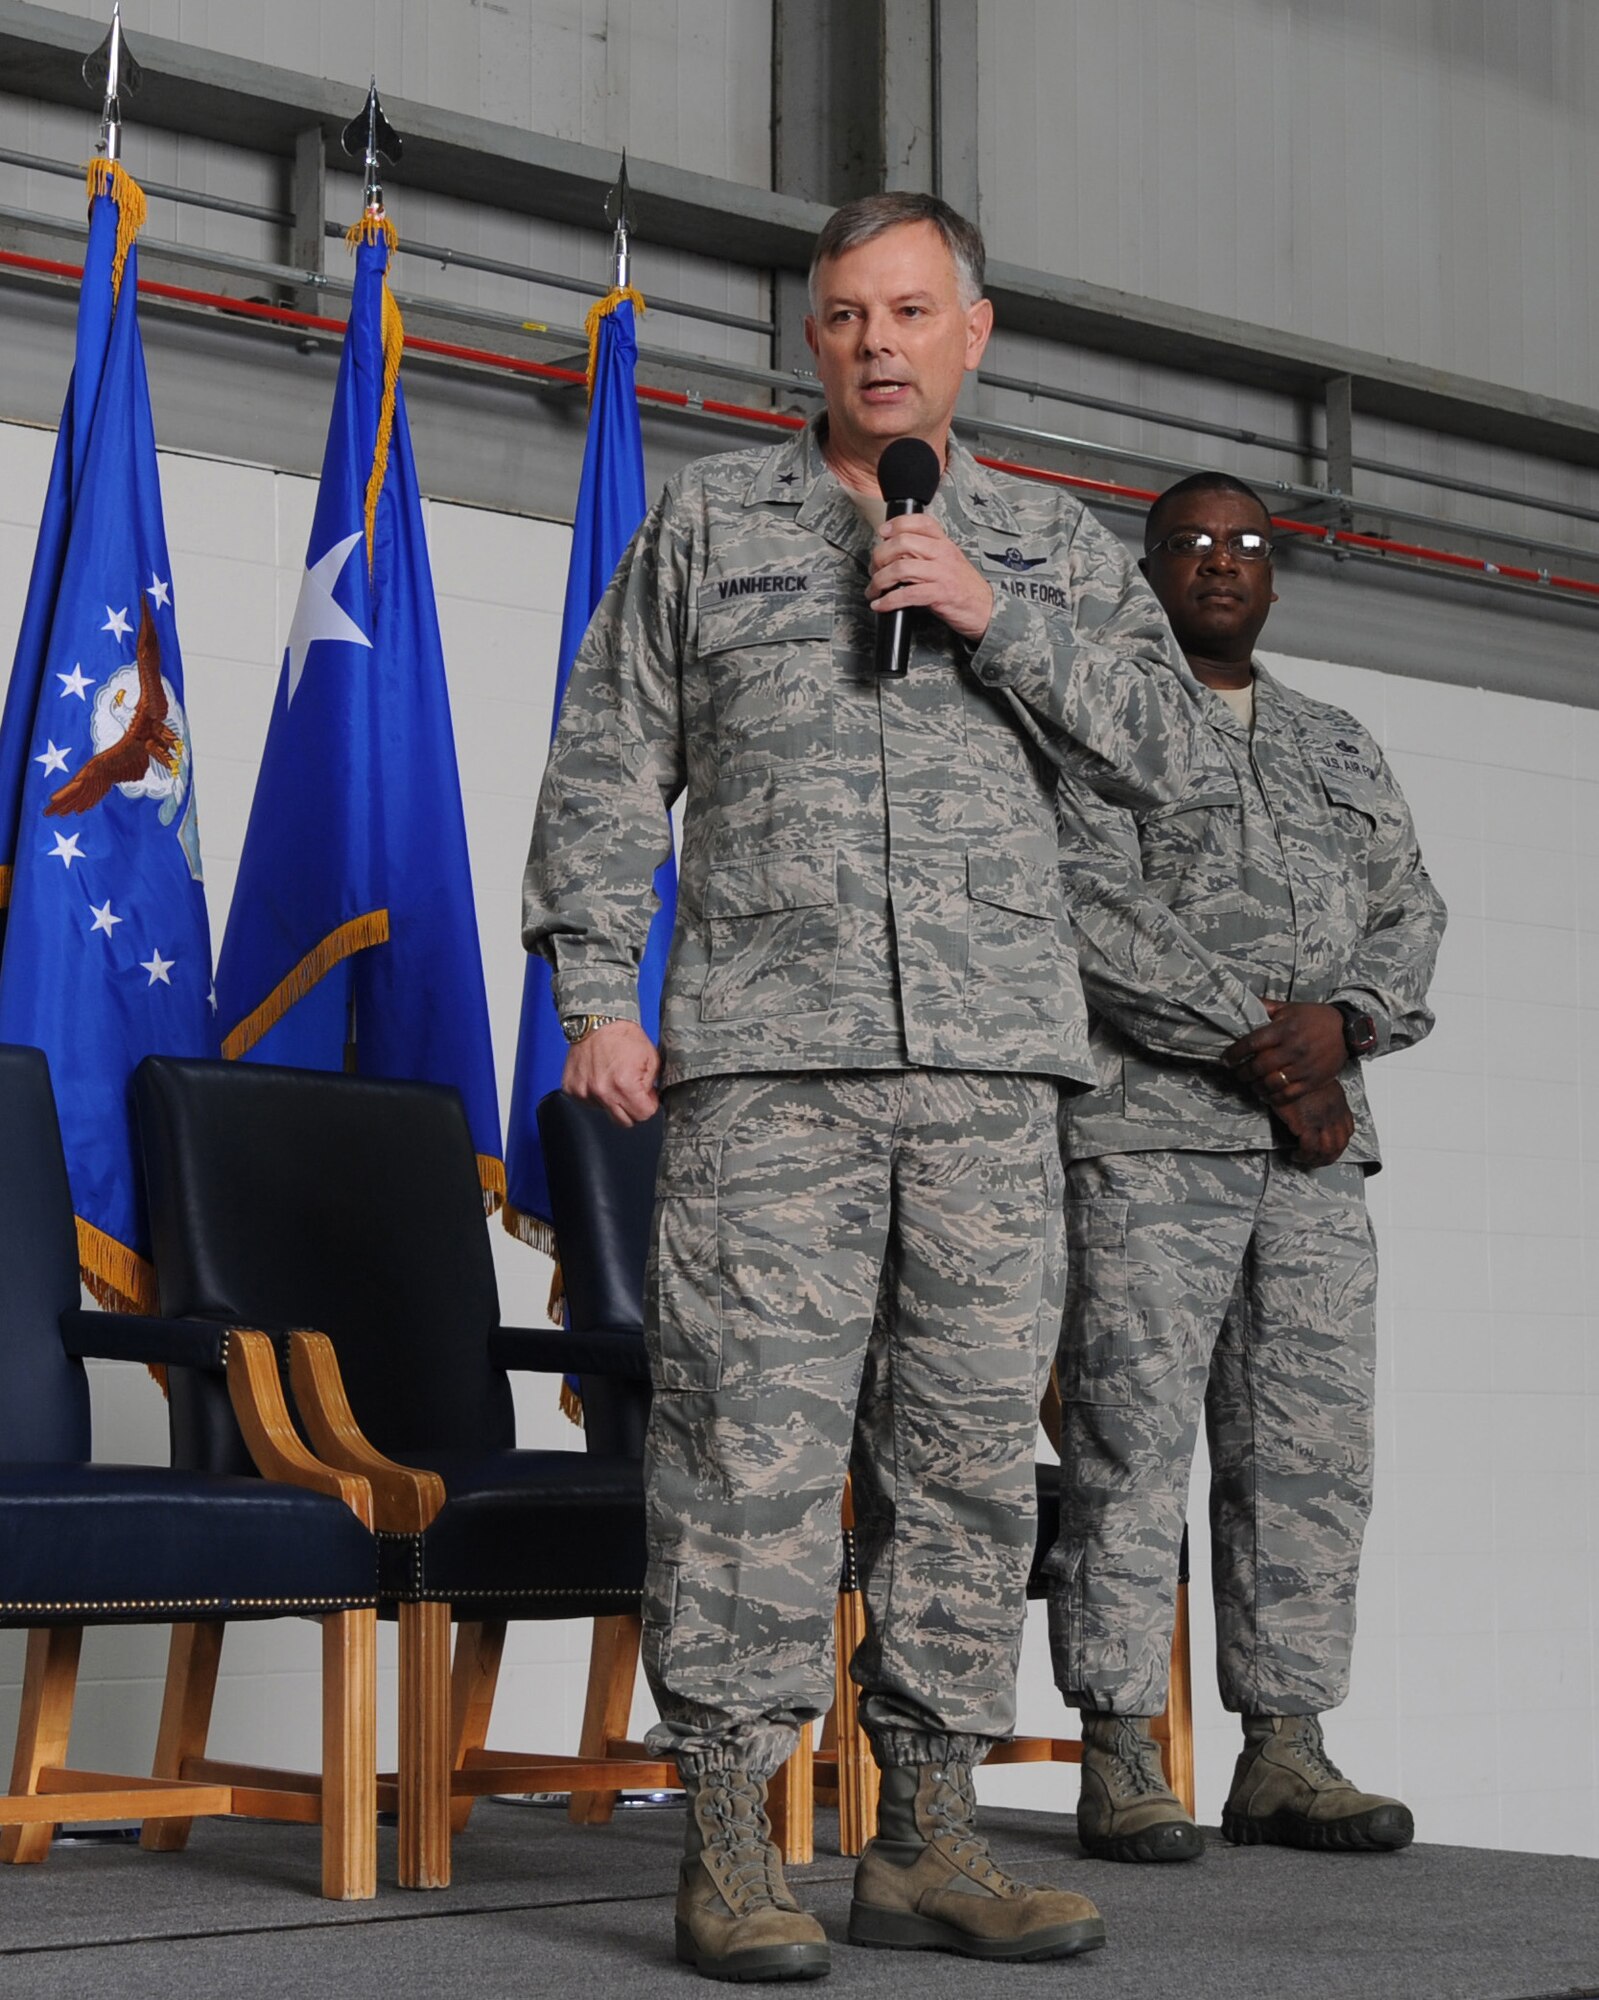 Brig. Gen. Glen VanHerck, 509th Bomb Wing commander, addresses Team Whiteman during the Omaha Trophy presentation, April 28, 2014, at Whiteman Air Force Base, Mo. VanHerck congratulated Team Whiteman for winning the award and for their day-to-day contributions to the U.S. Strategic Command and Air Force missions. The 509th Bomb Wing supports USSTRATCOM's strategic deterrence mission by operating and maintaining B-2 Spirit bombers to deter strategic threats from adversaries and assure our allies of our commitment to their security.  (U.S. Air Force photo by Senior Airman Bryan Crane/Released)